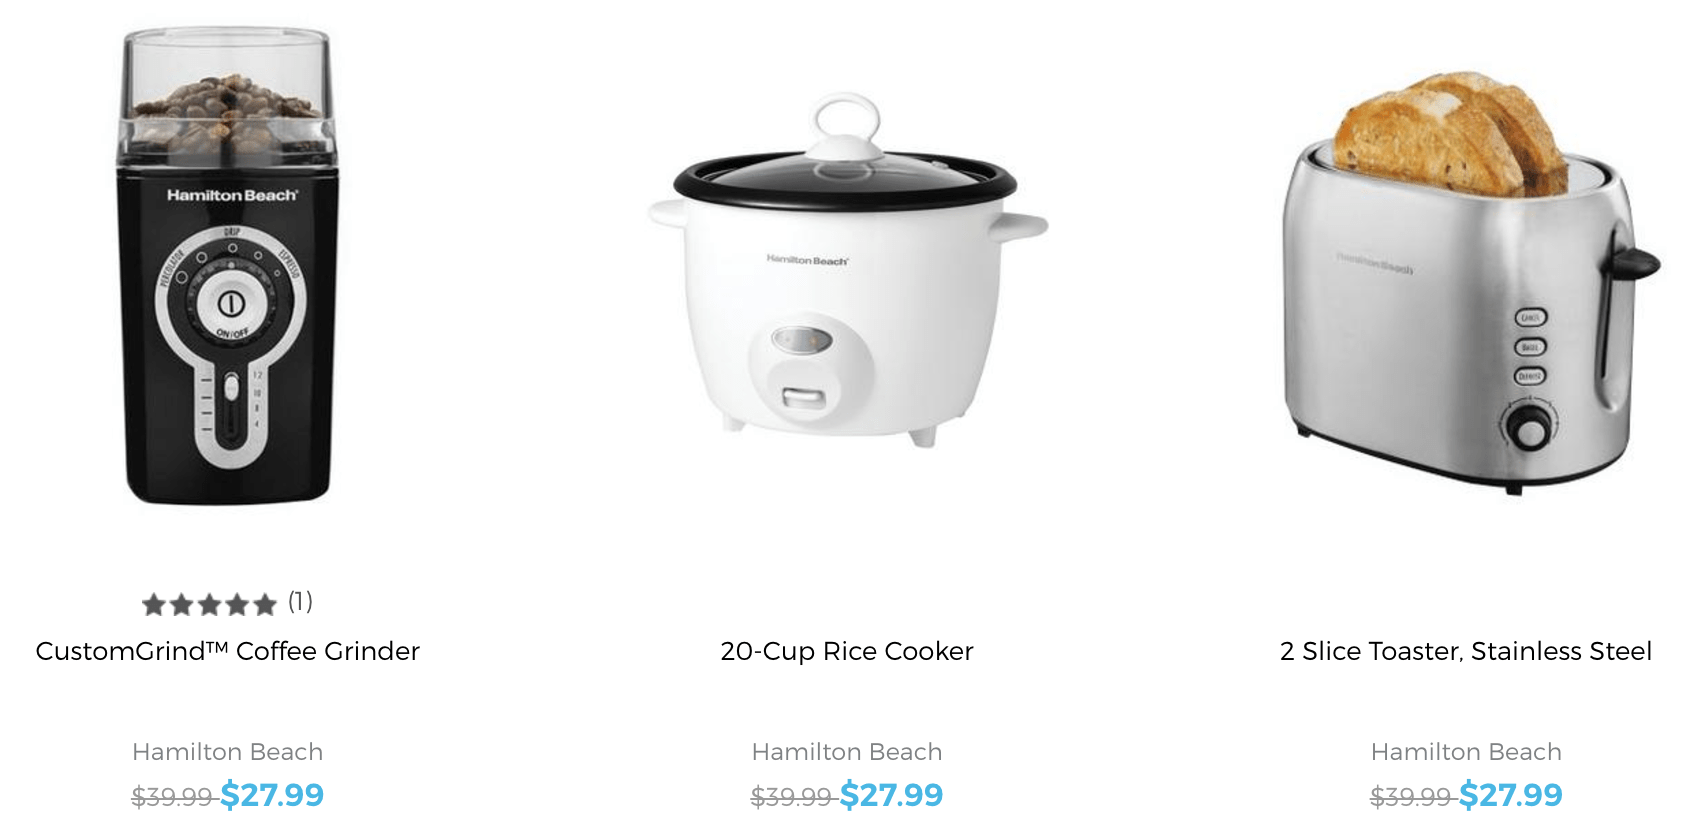 Does Sears sell small kitchen appliances?